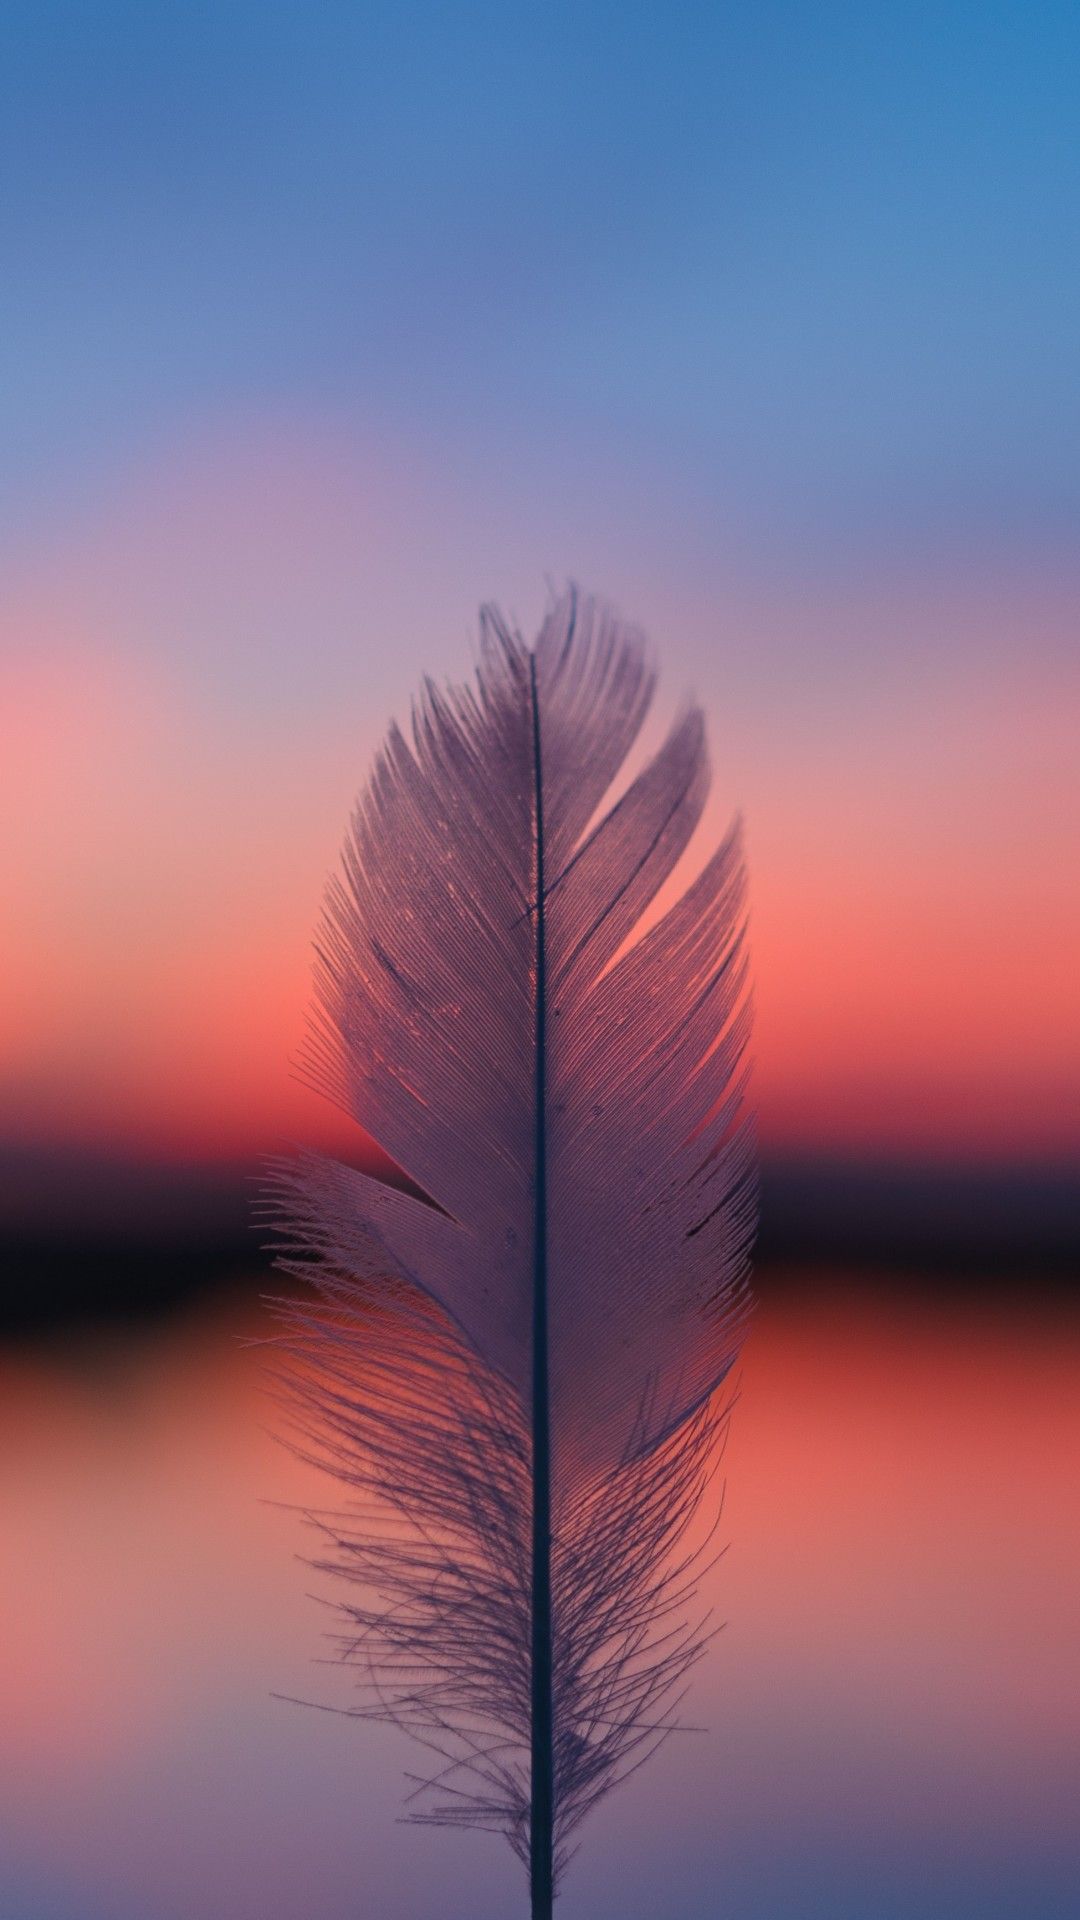 Feather Focus Blur Sunset 5k Mobile Wallpaper iPhone, Android